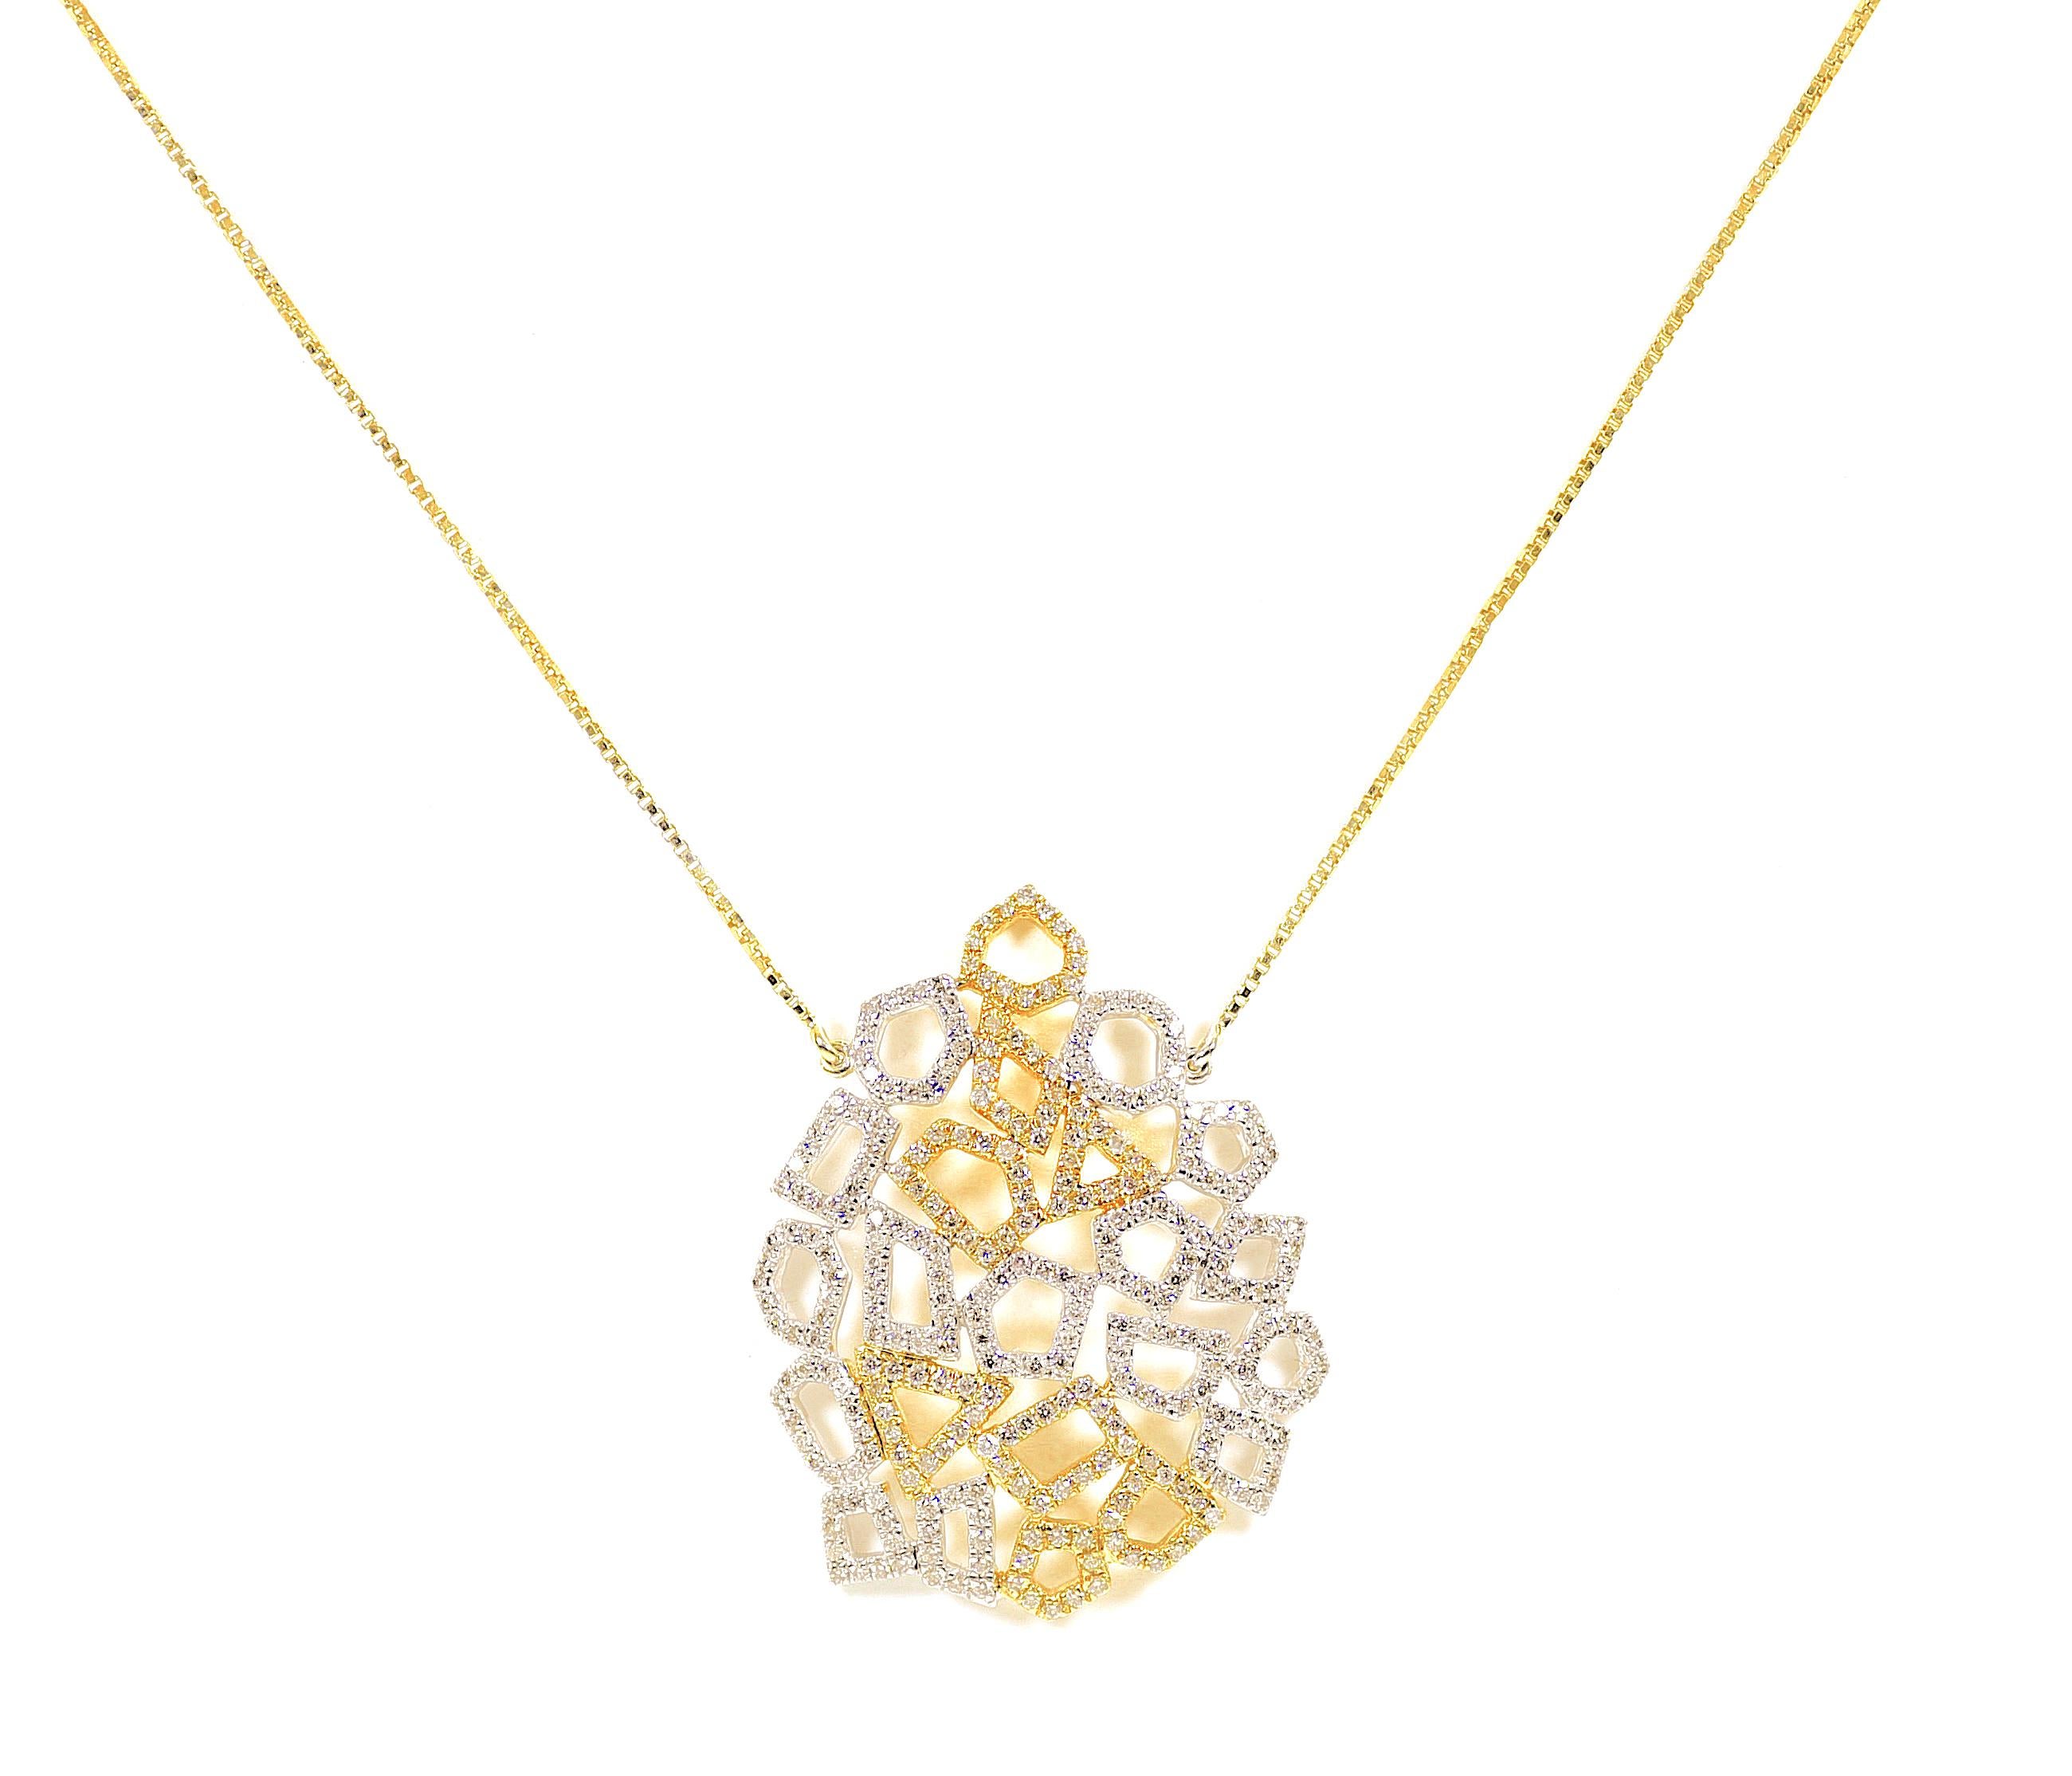 This one of a kind gorgeous honey comb necklace showcases sparkling round diamonds in micropave setting in fine 18k yellow and white gold. 
The box chain is an 18k yellow gold chain of length 18